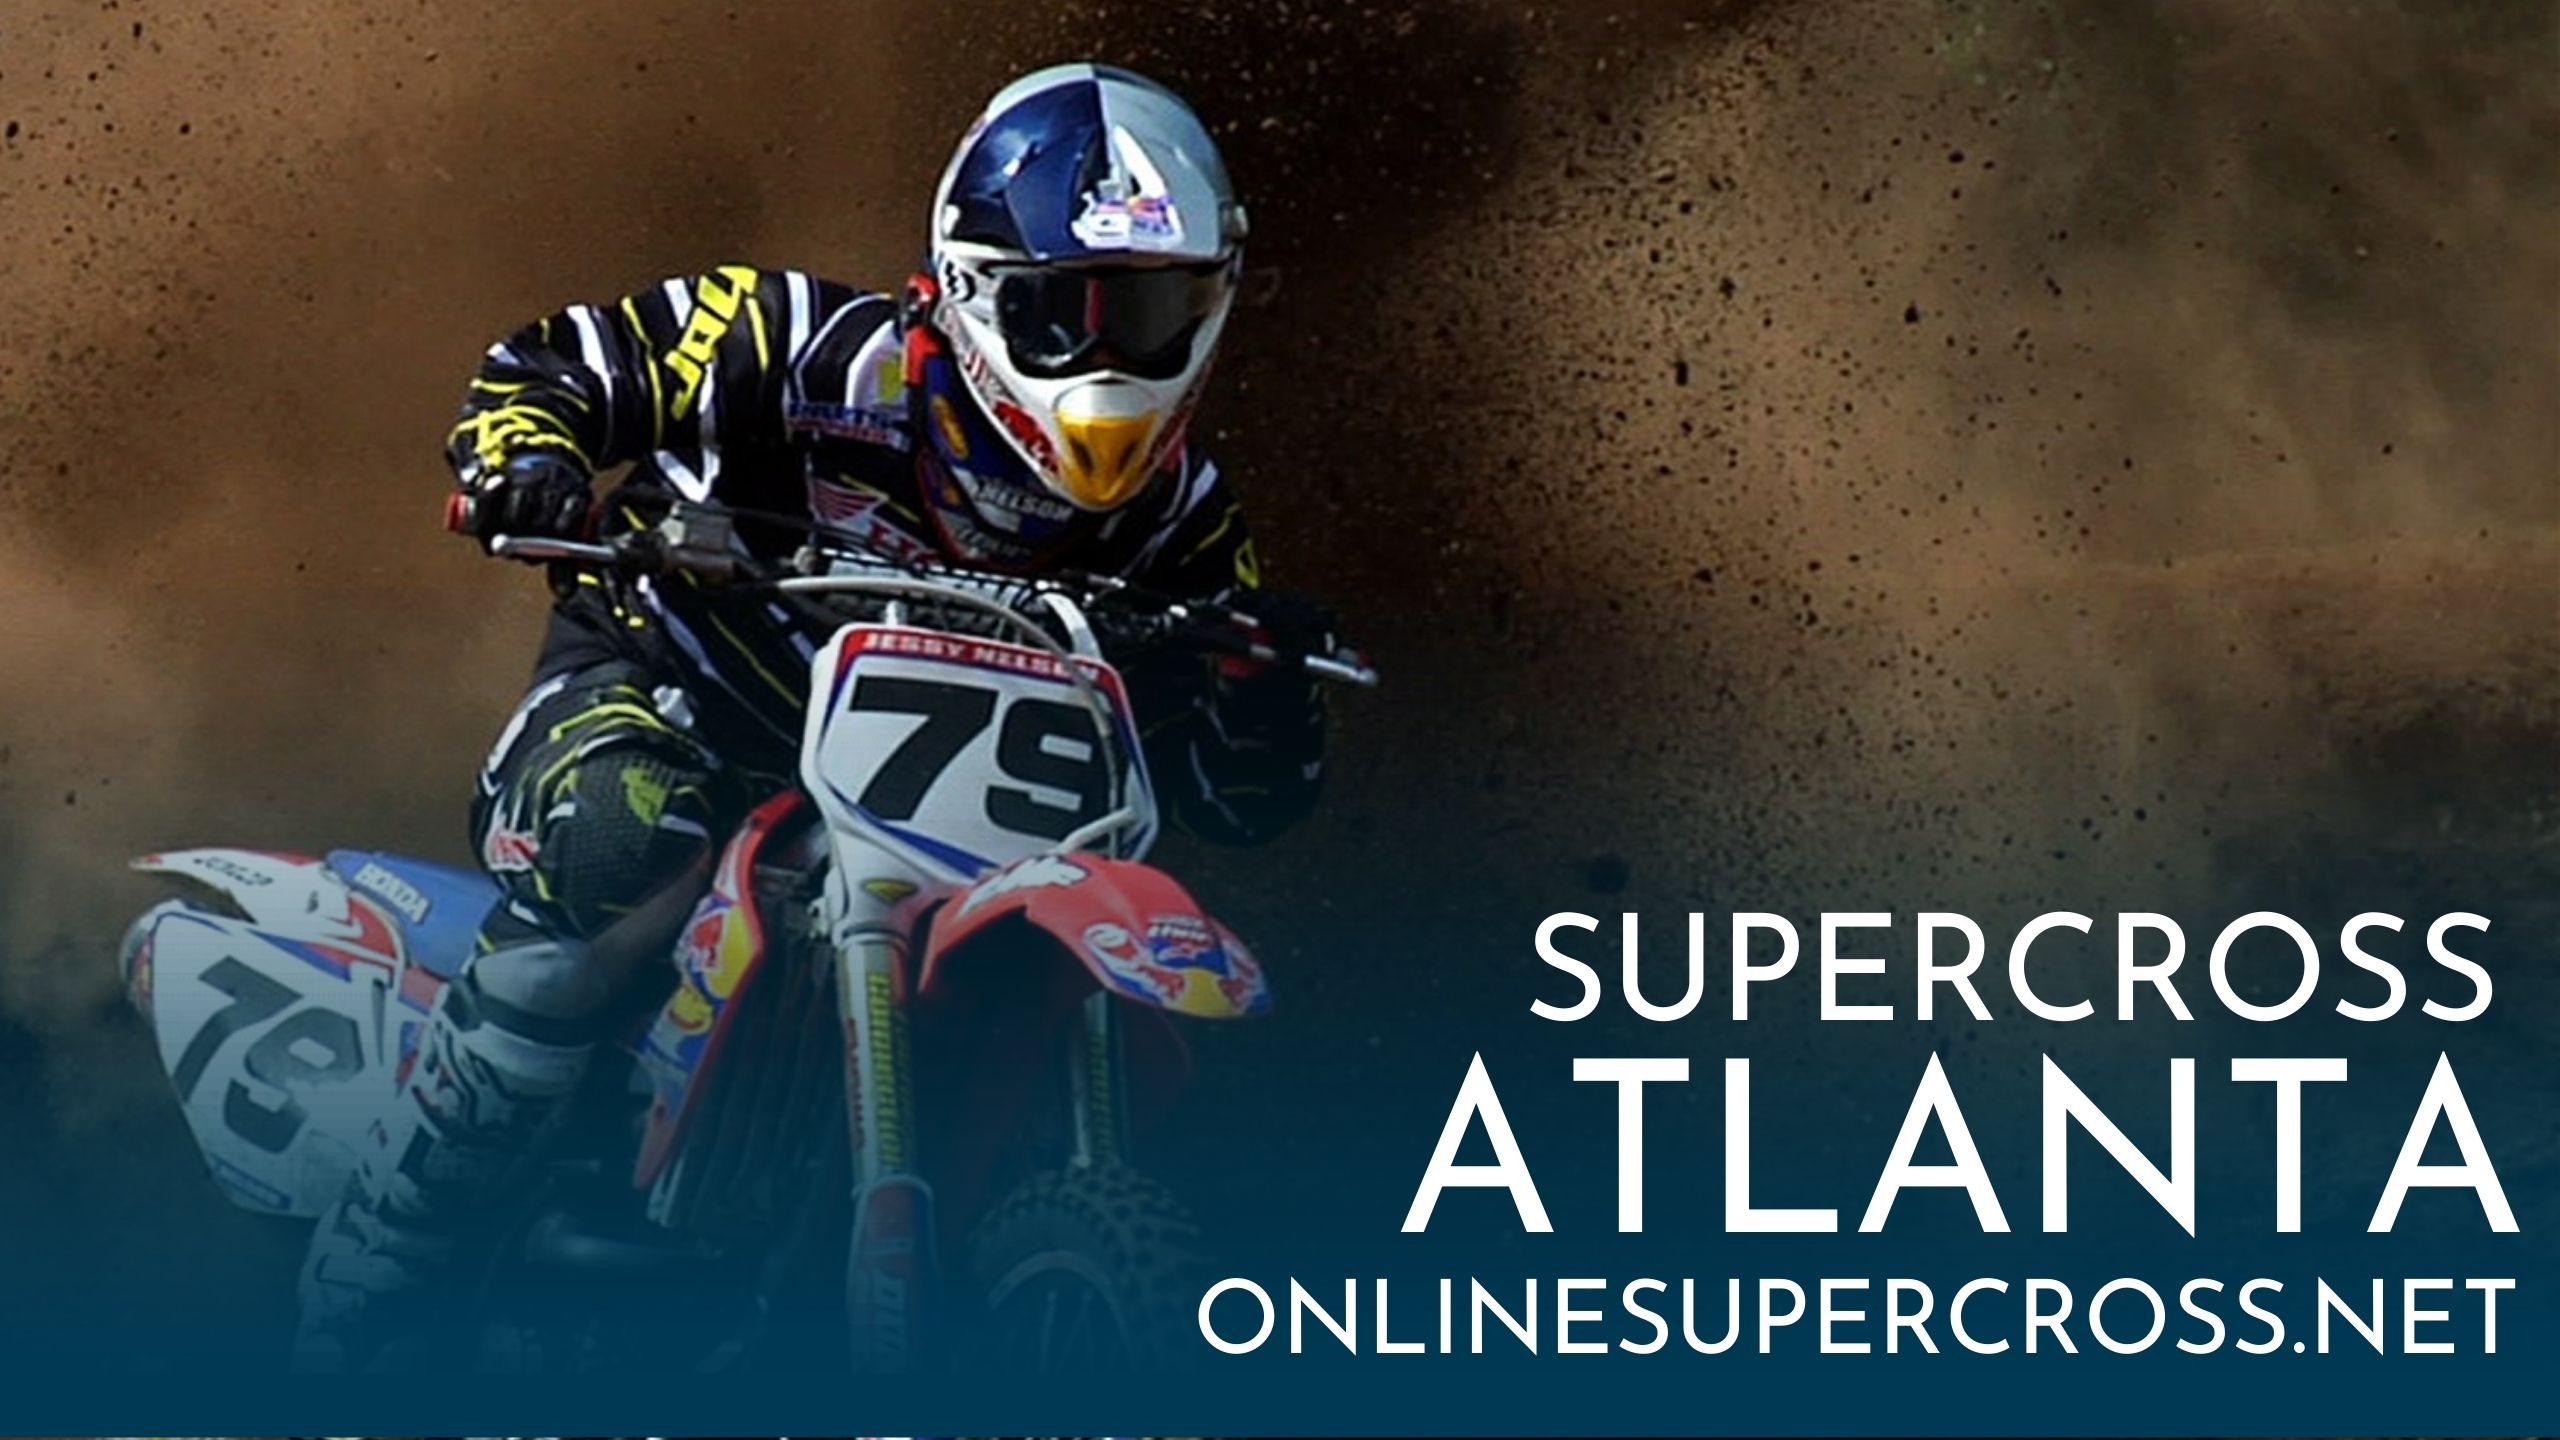 Live AMA Supercross New Jersey 2016 Online